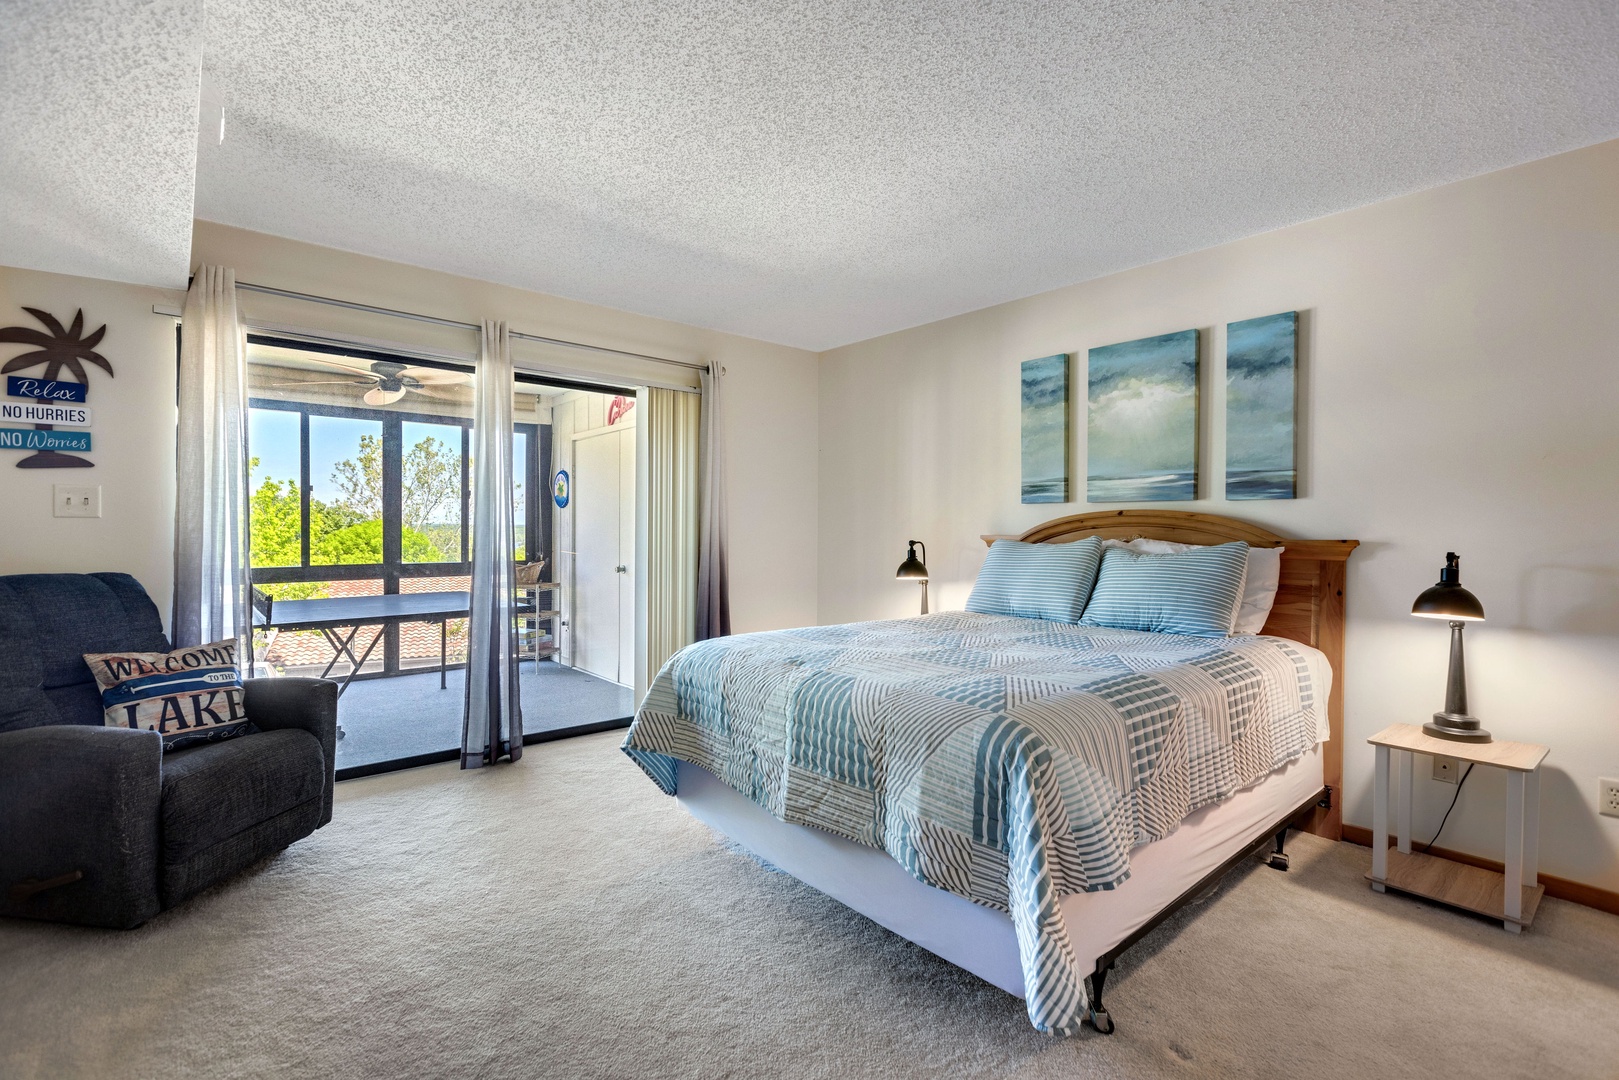 The primary bedroom offers a queen bed, deck access, & a private ensuite